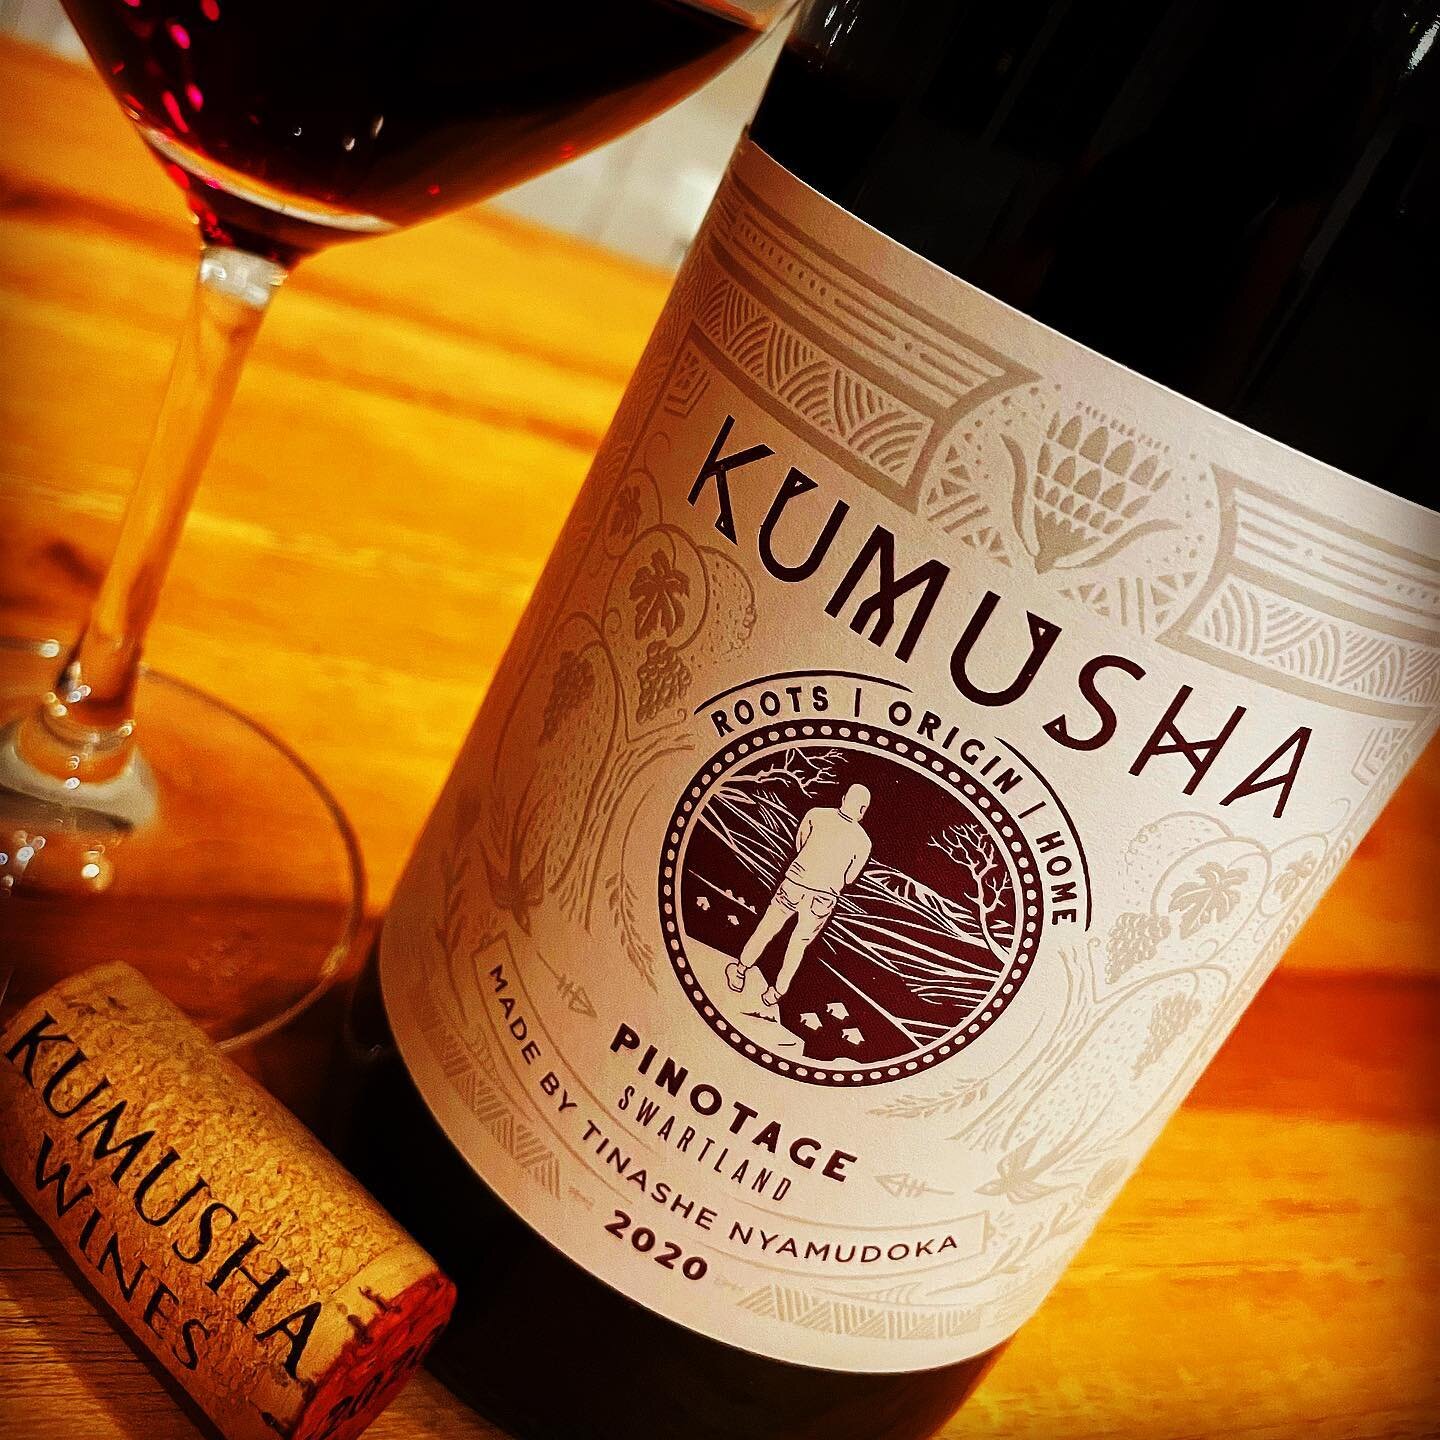 What better way to celebrate international Pinotage day then to enjoy a bottle of the latest @kumushawines release from @tinashe_nyamudoka - a wonderful example of how Pinotage should be made. Light and Refreshing and perfect for a Fall day.